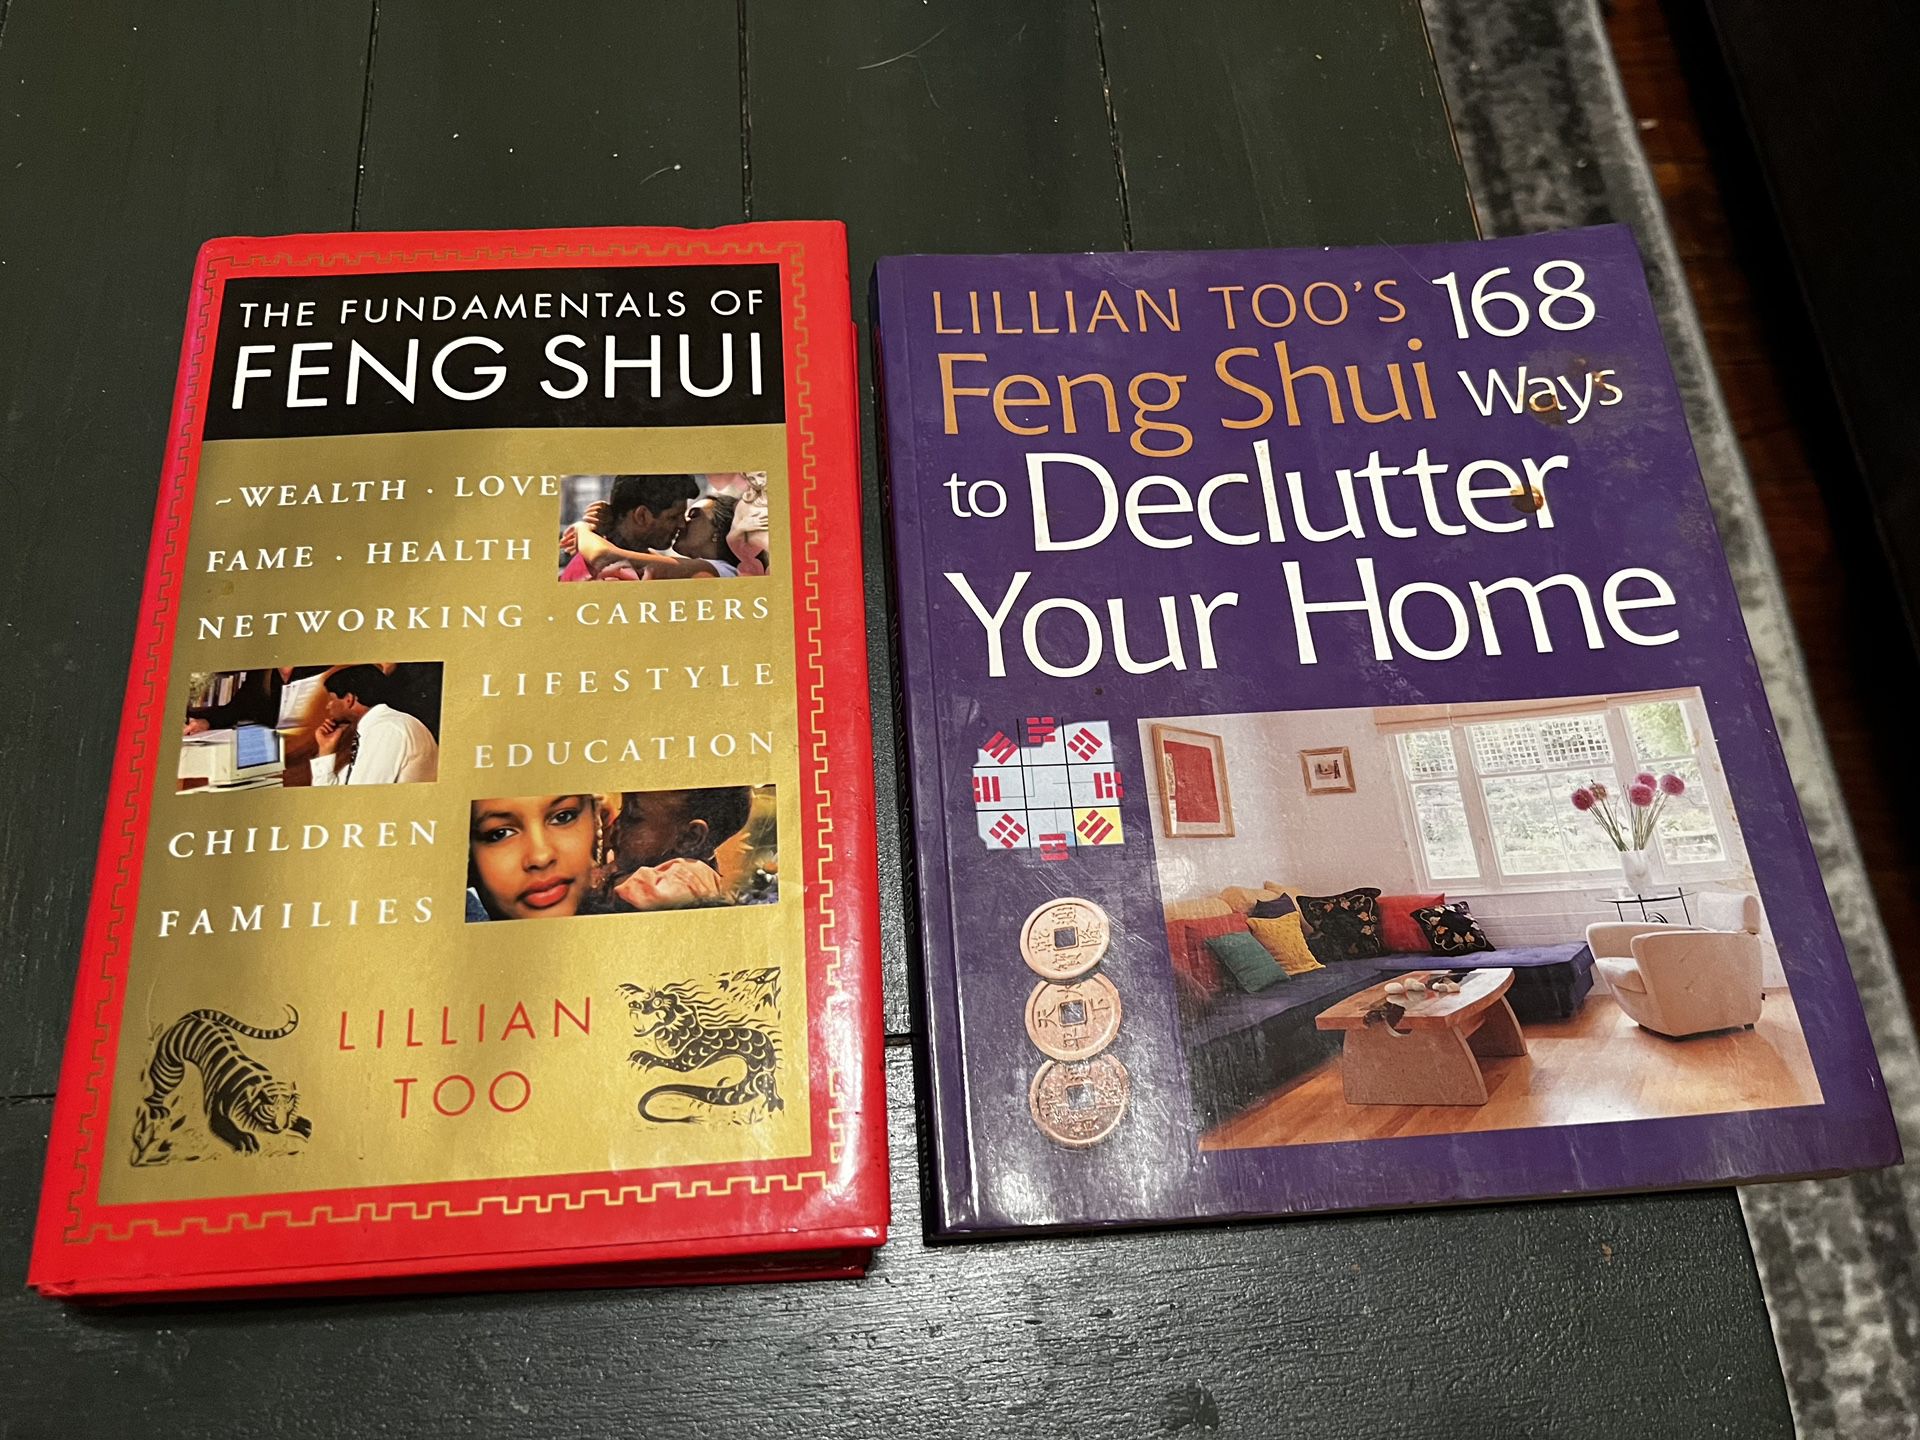 THE FUNDAMENTALS OF FENG SHUI (Hardcover) & LILLIAN TOO’S 168 FENG SHUI WAYS TO DECLUTTER (YOUR HOME (Paperback) 